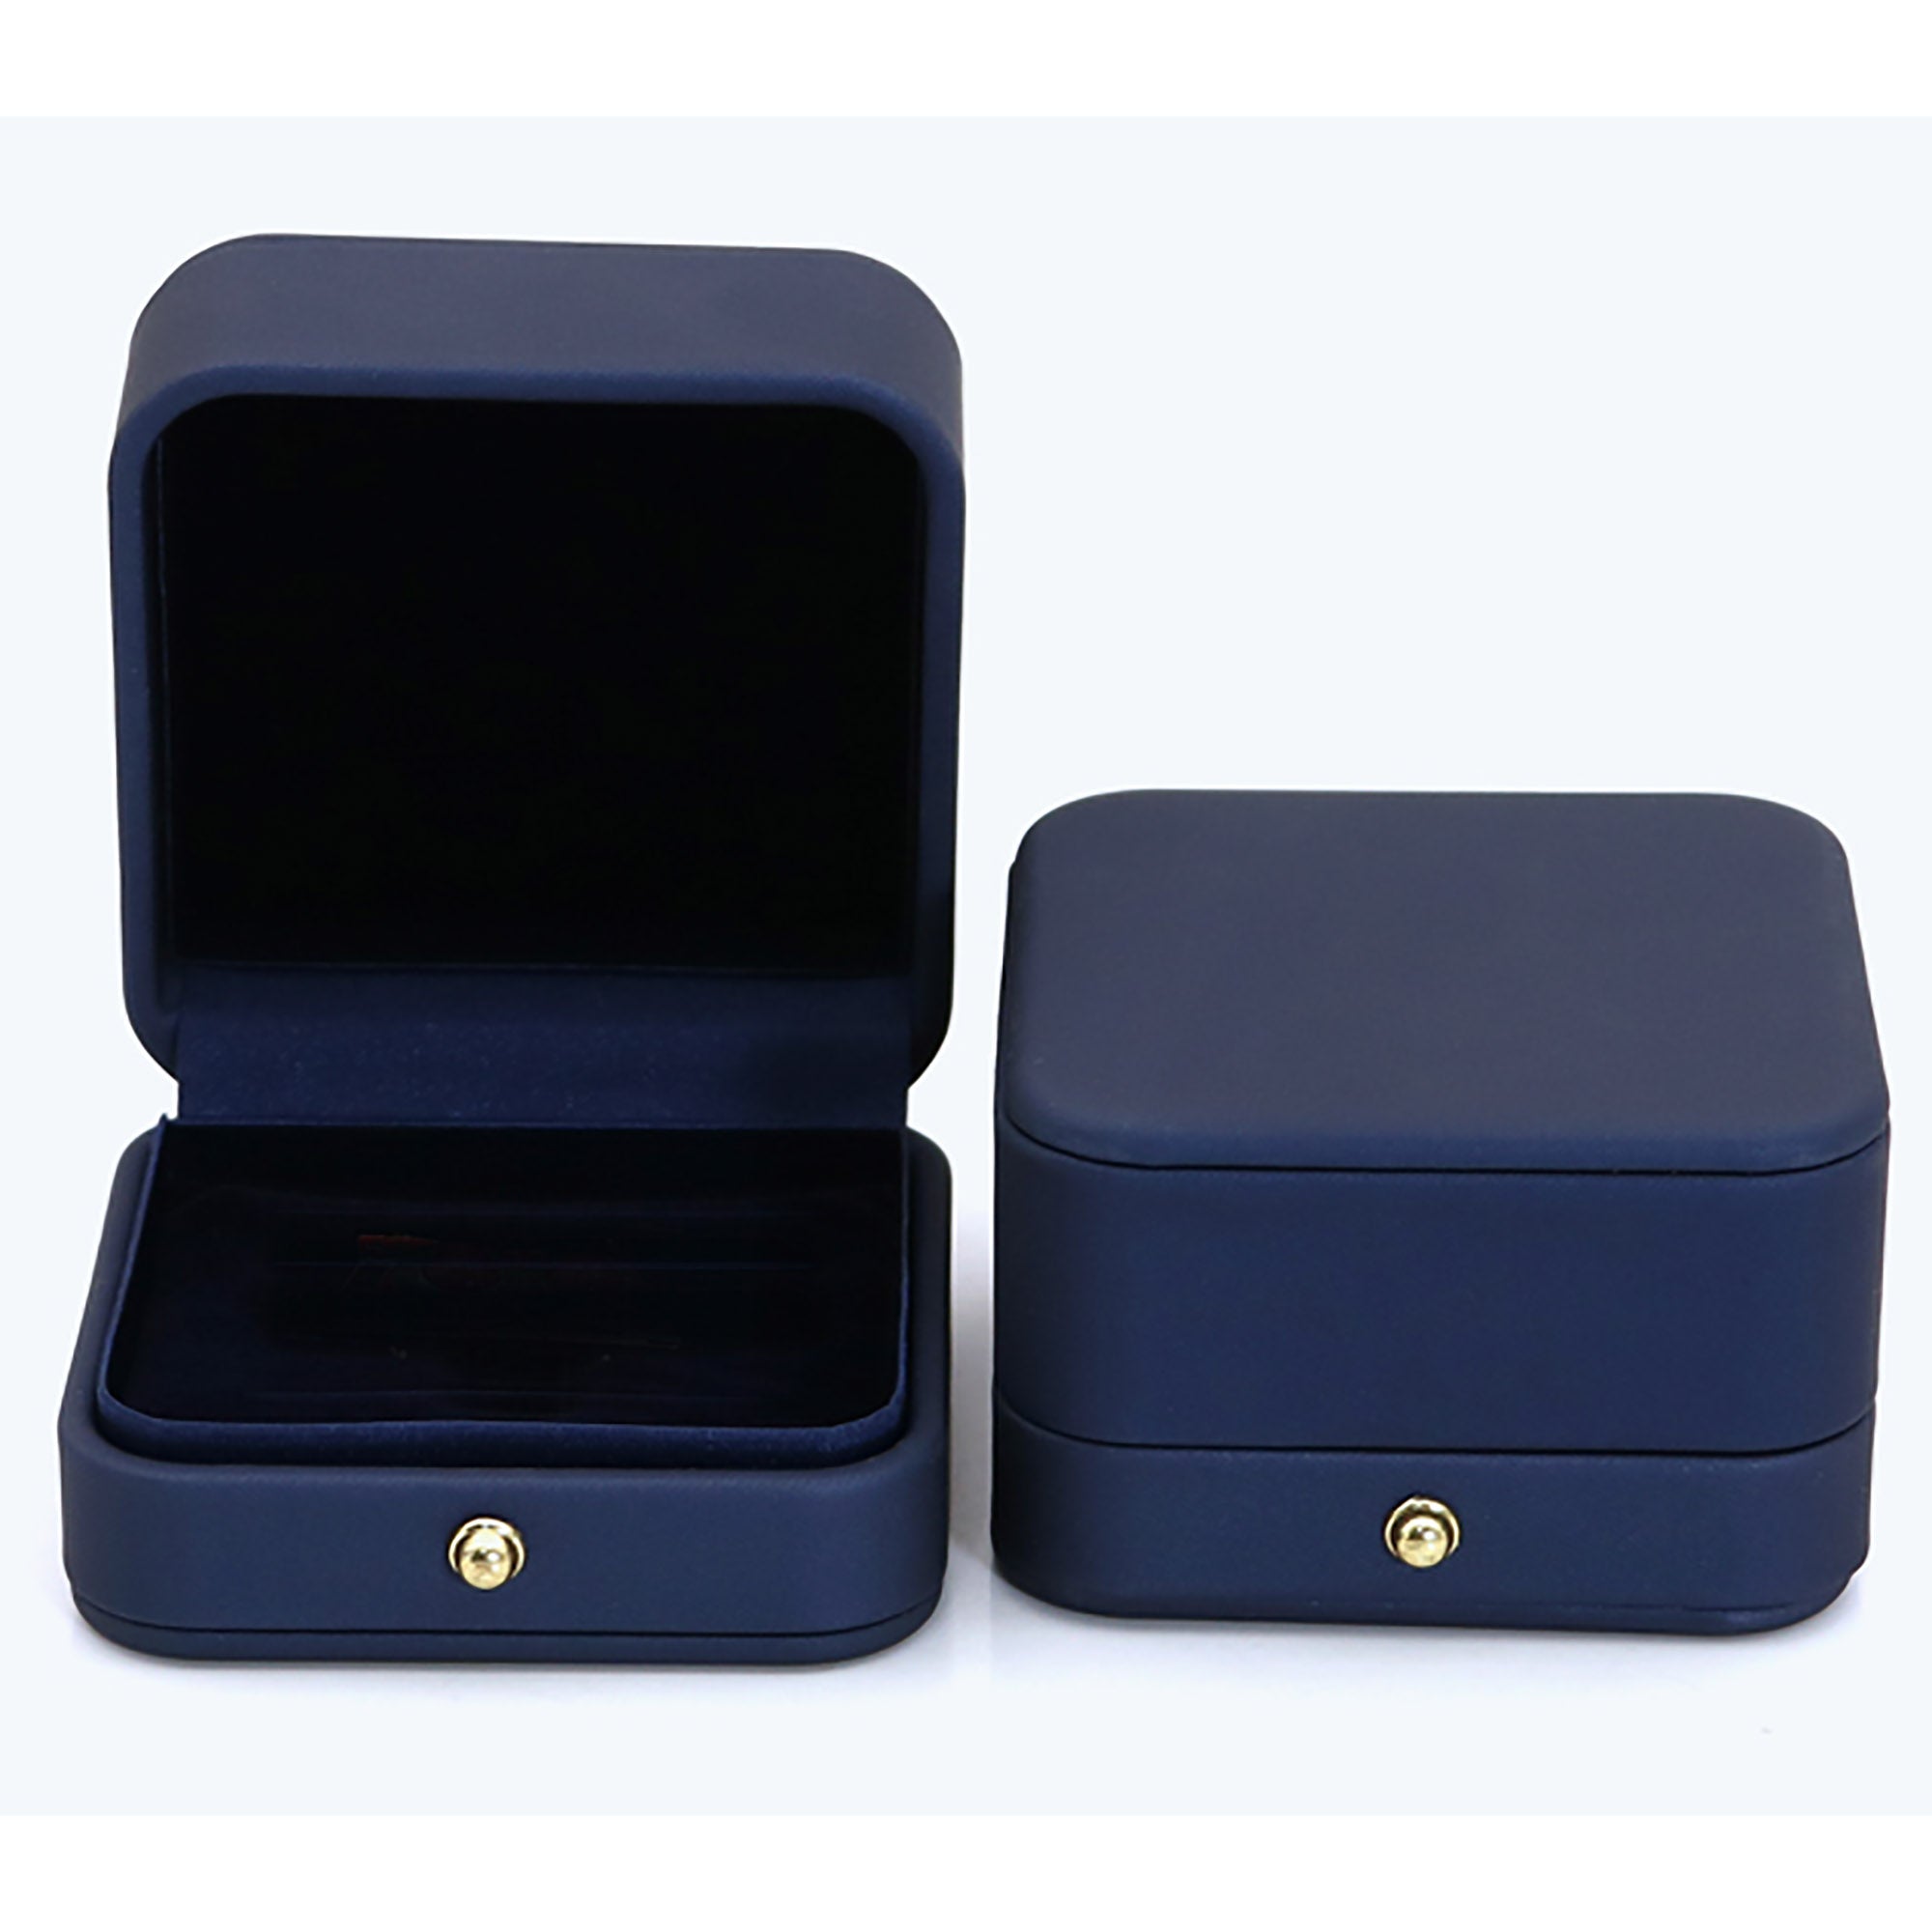 Navy Jewelry Box / Gift Box Vintage Gift Home Deco Decoration Design